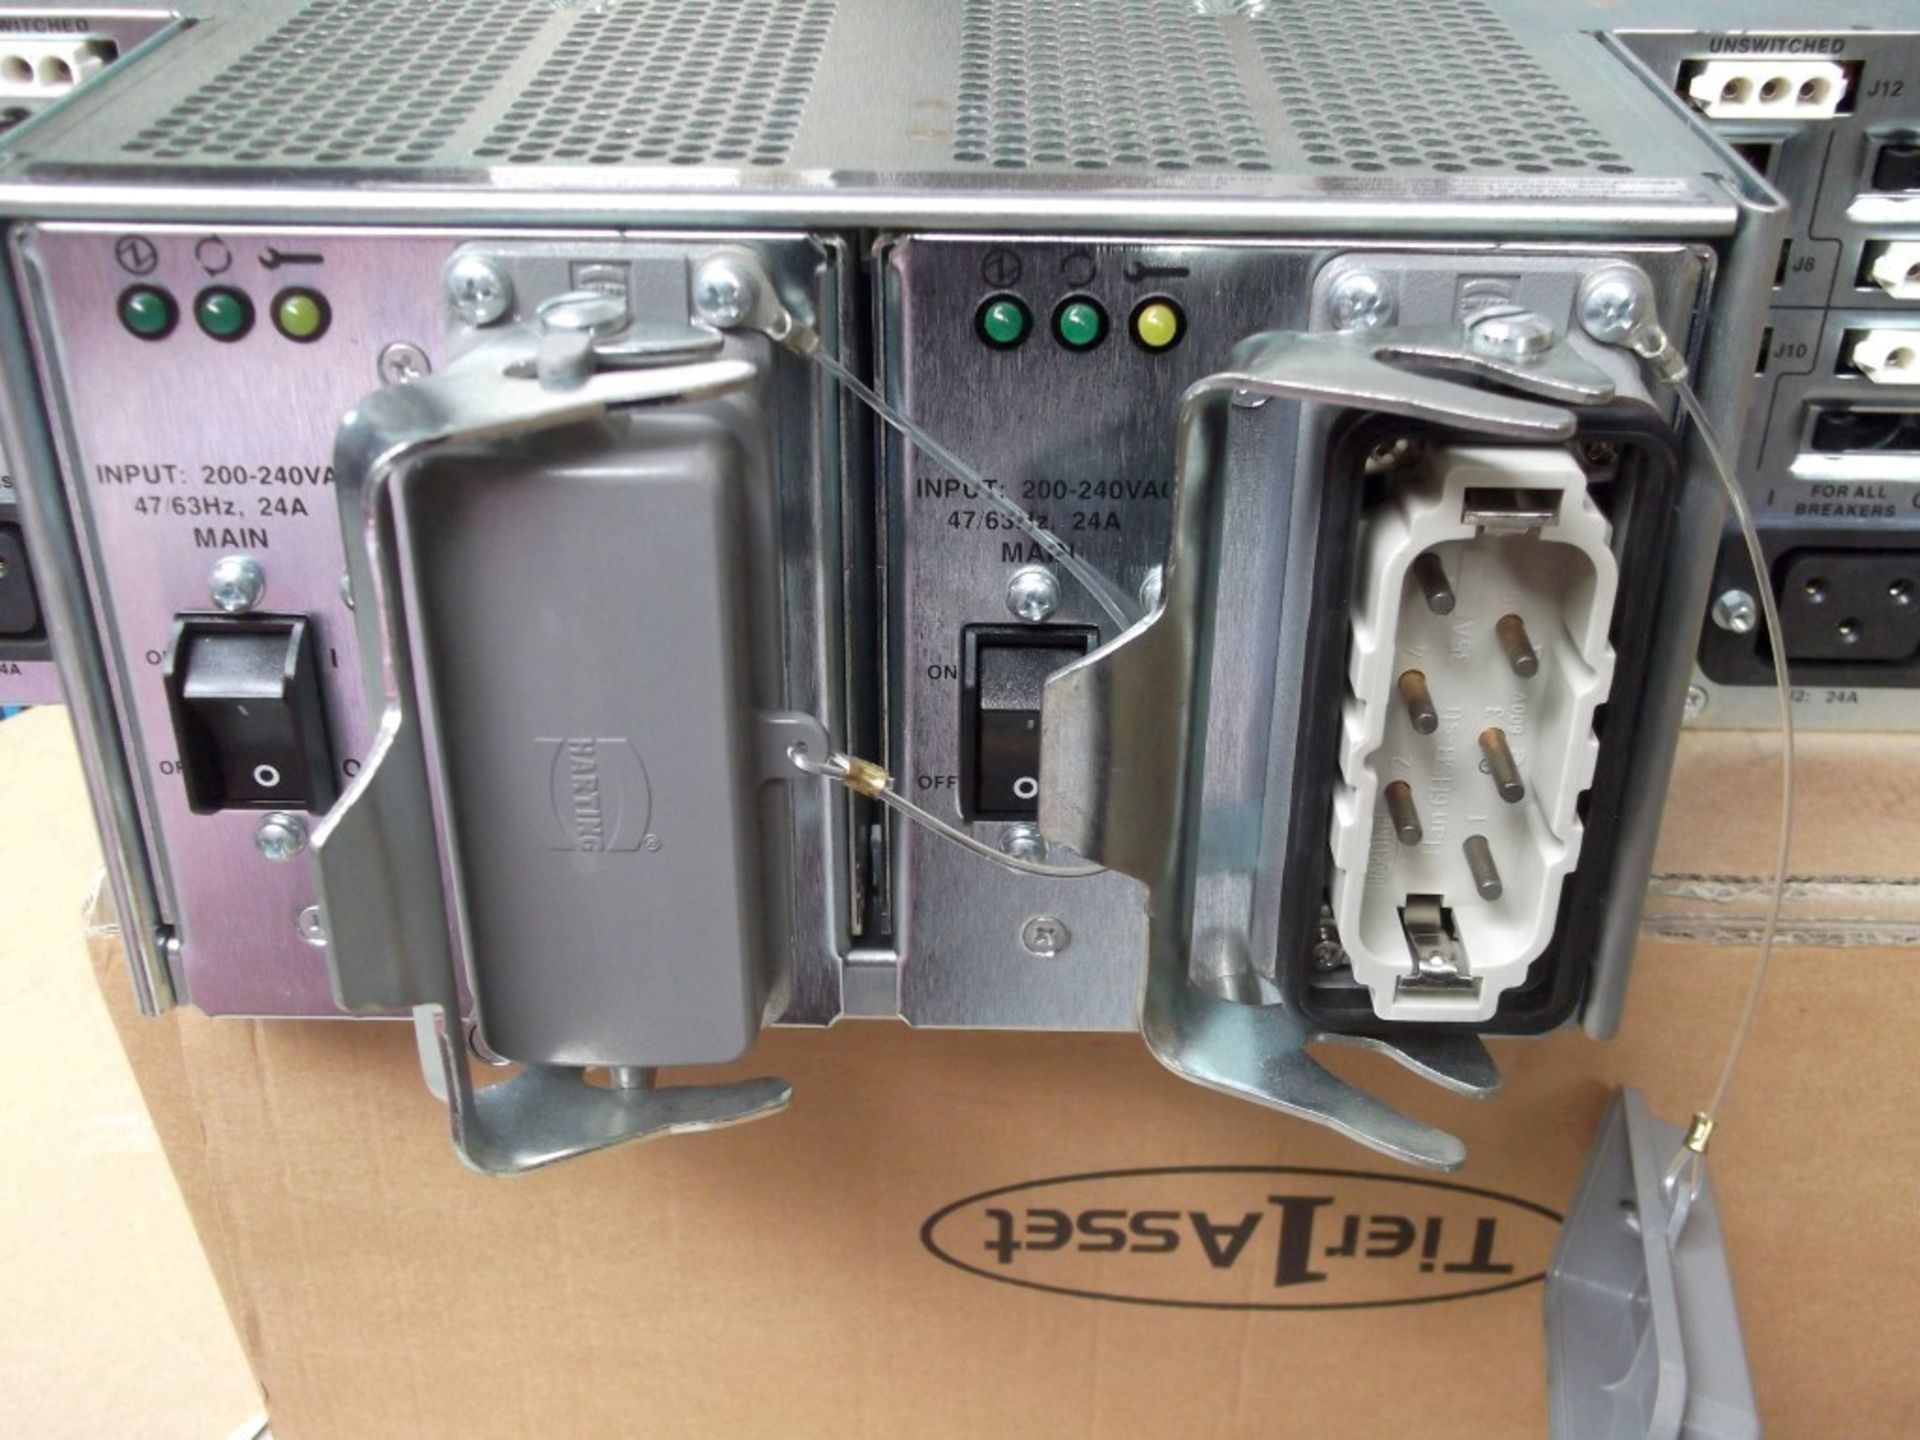 1 x Sun Redundant Transfer Switch - 3001335-05 RTSC240V24A - Ref NSB018 - Recently Removed From A - Image 2 of 4